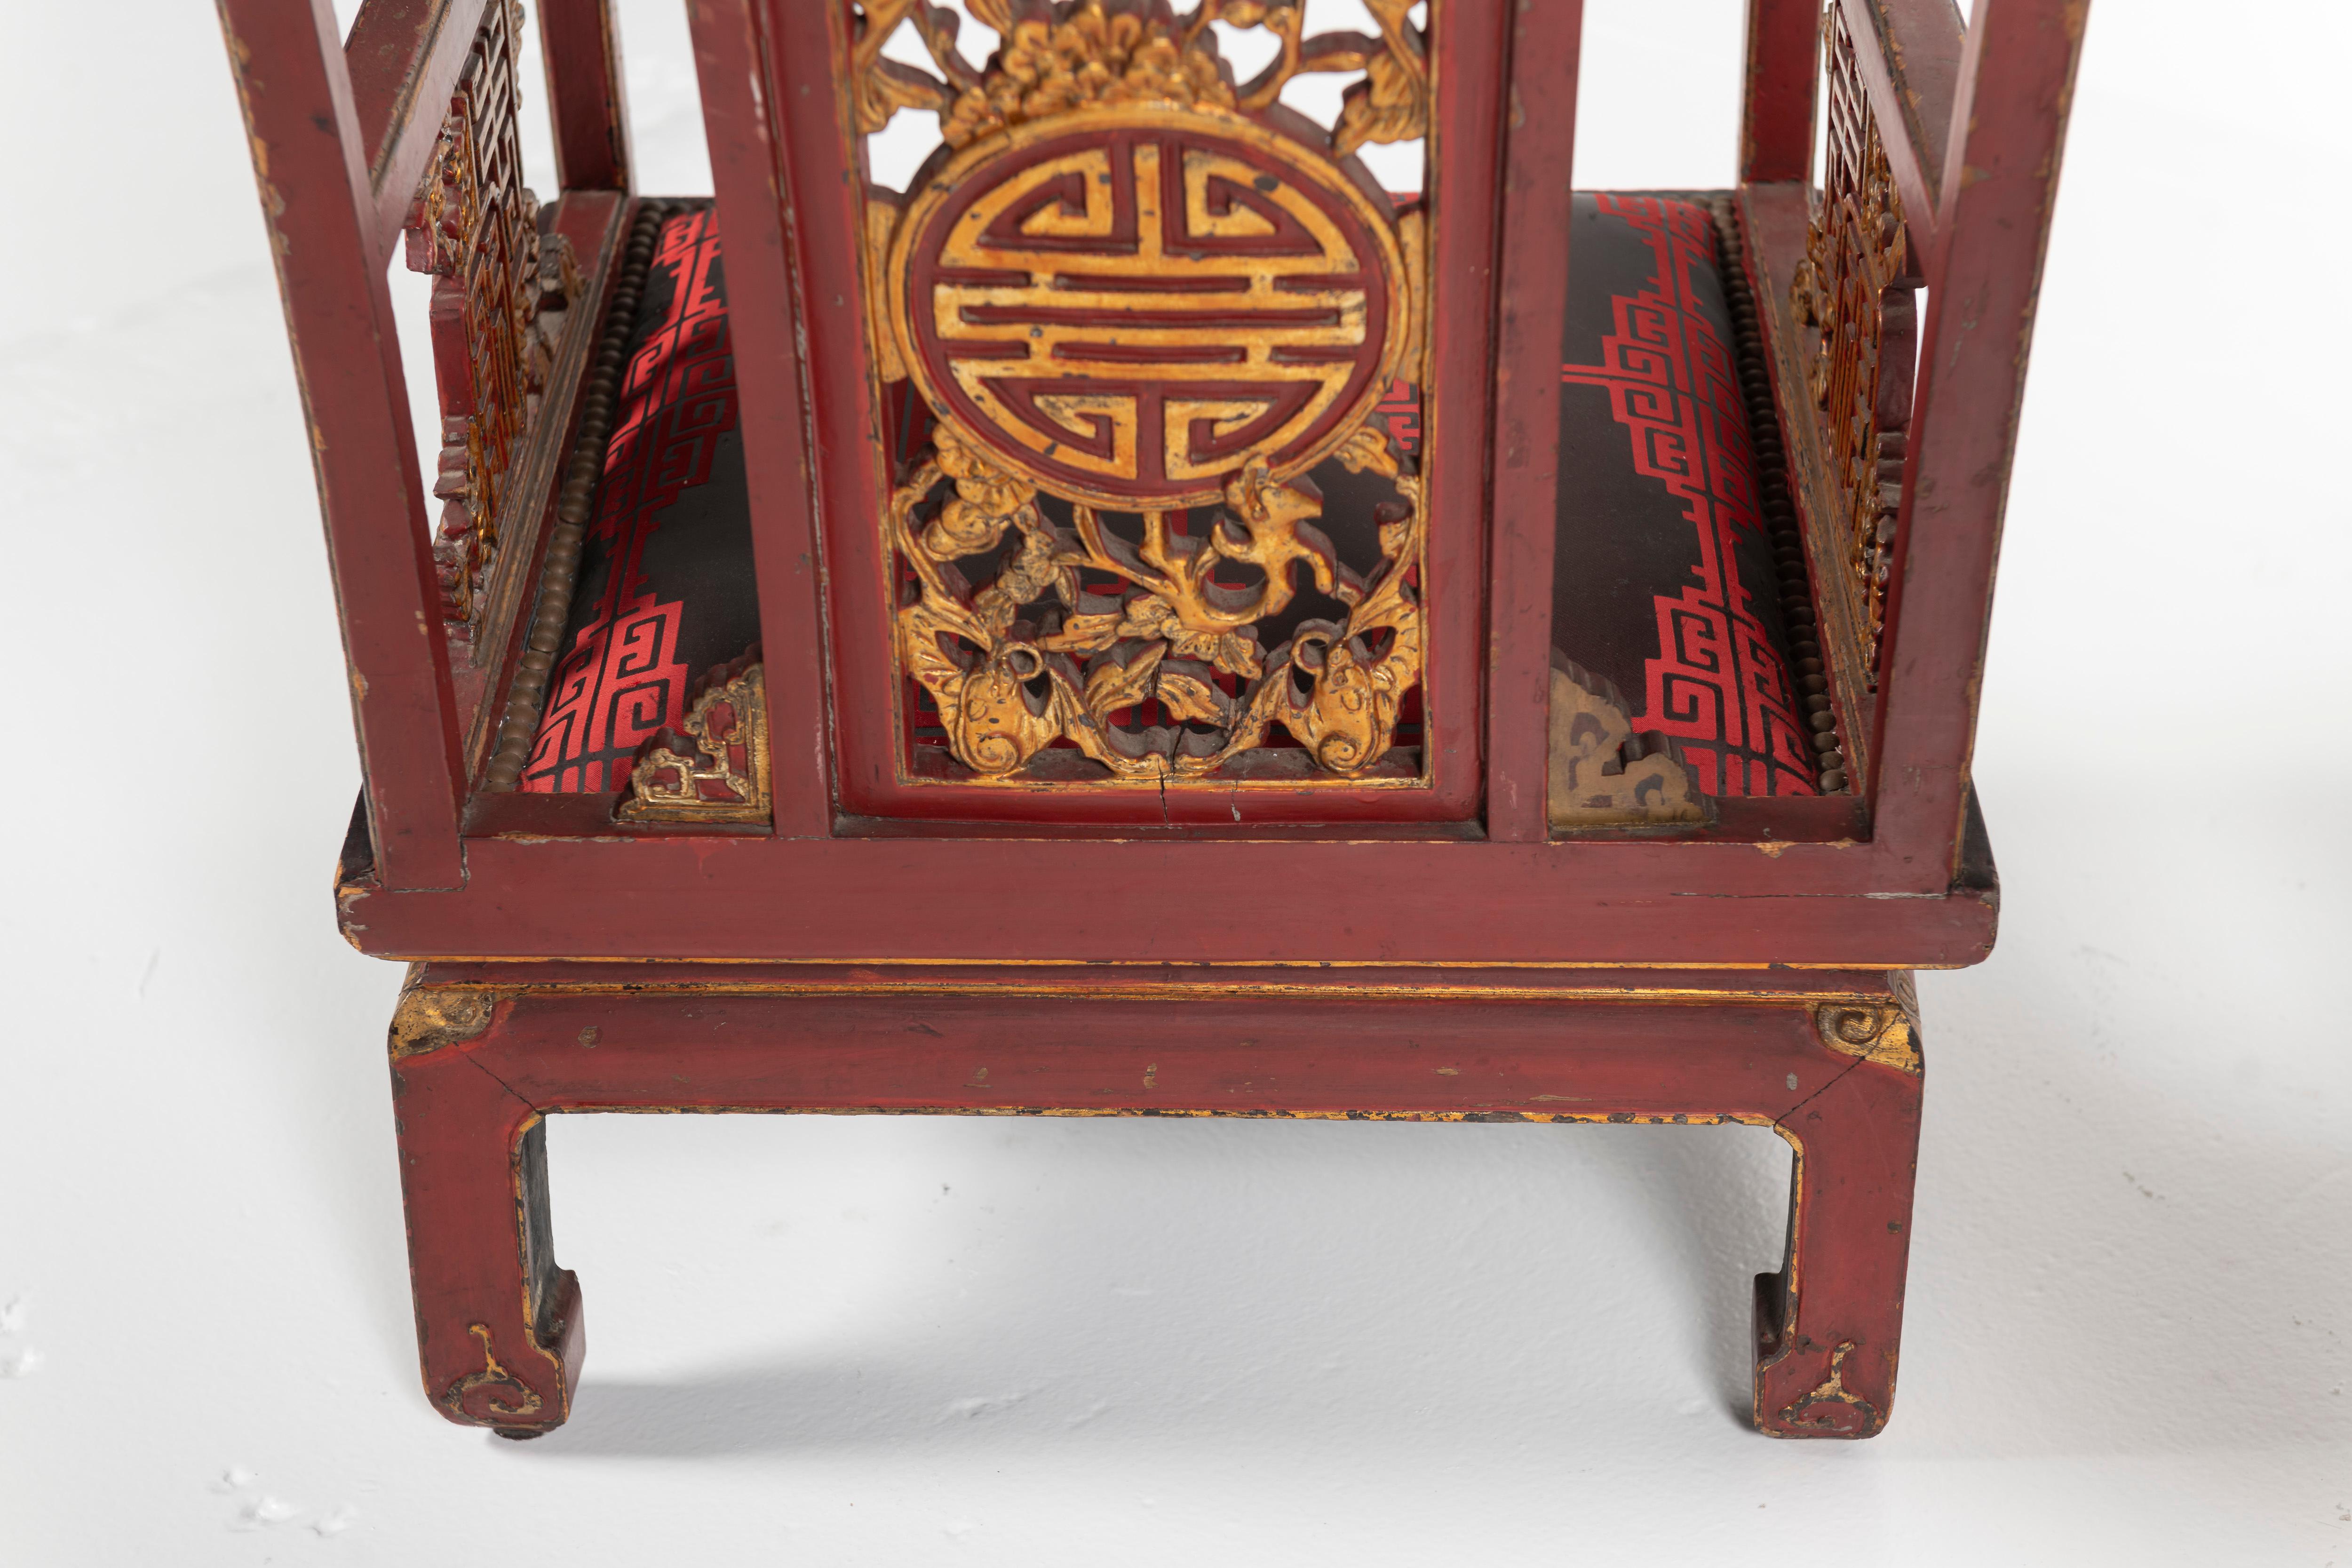 Pair of Antique French Chinoiserie Armchairs, Red and Gold Lacquer, 19th Century For Sale 4